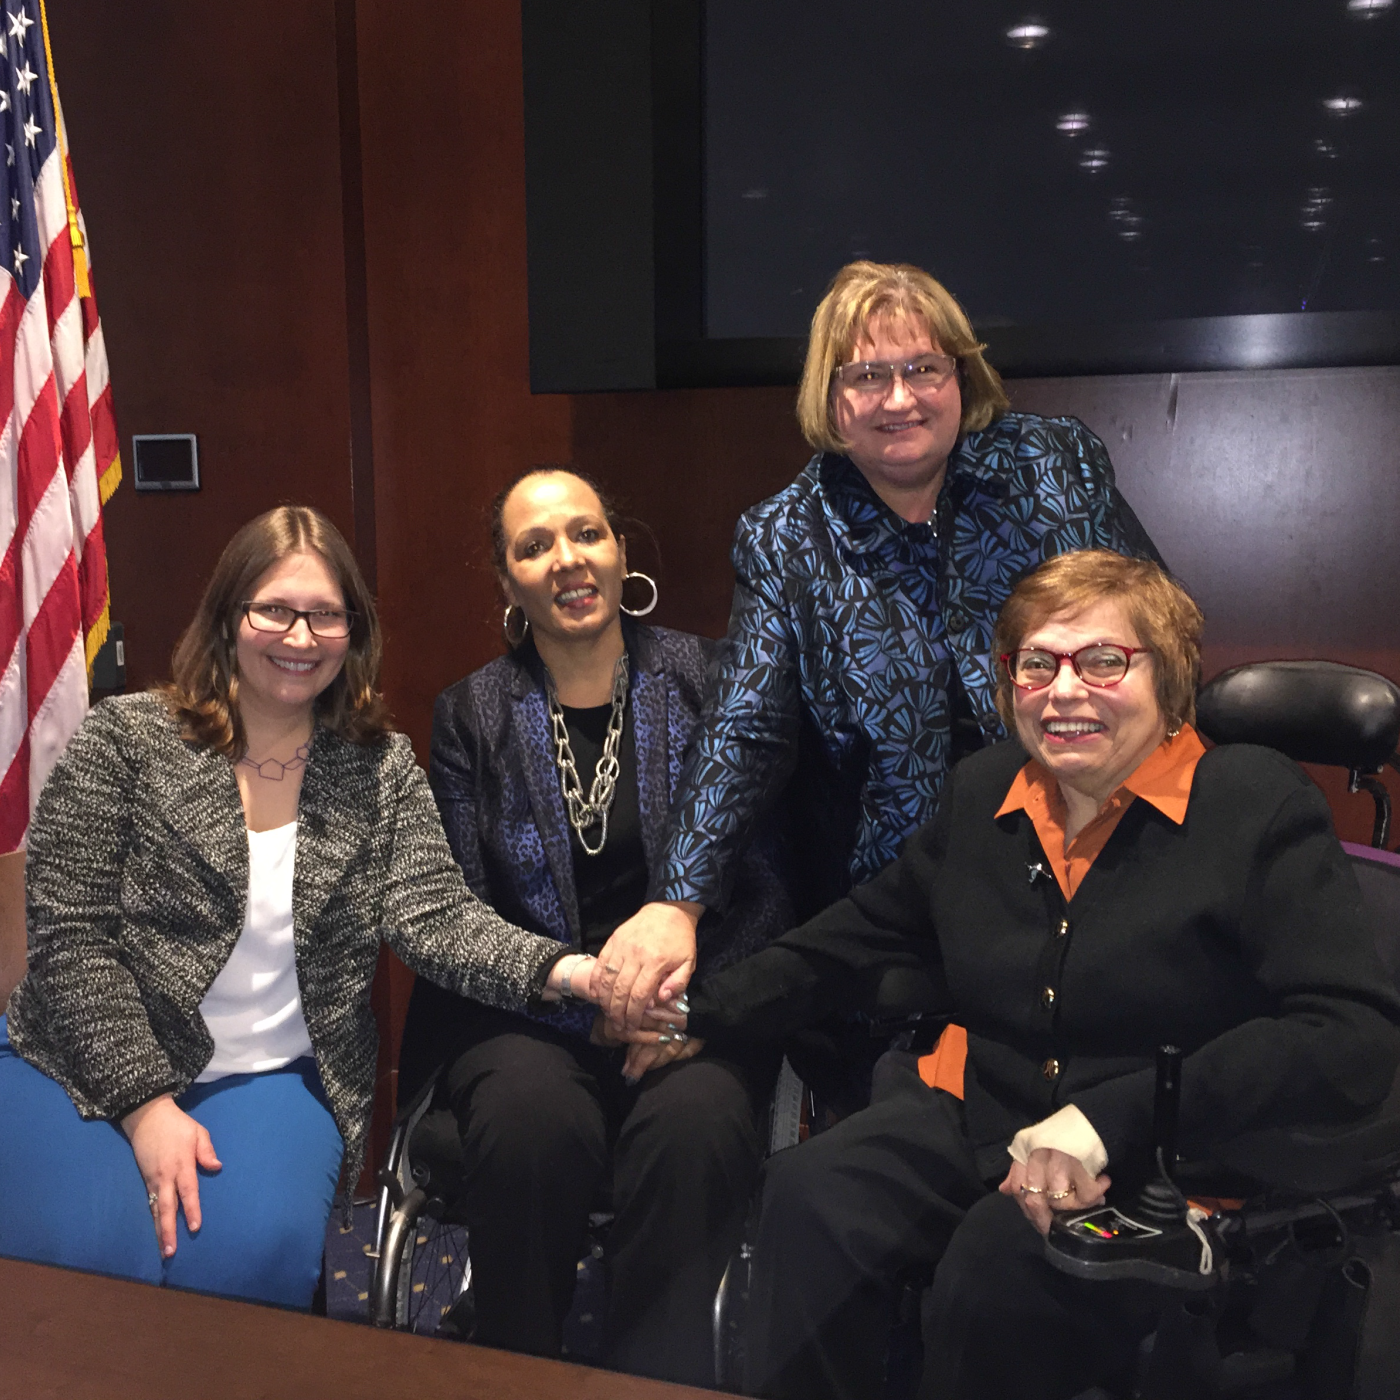 Panelists Virginia Atkinson, Judith Heumann, Isabel Hodge, and Charlotte McClain-Nhlapo pose for a photo post-discussion.